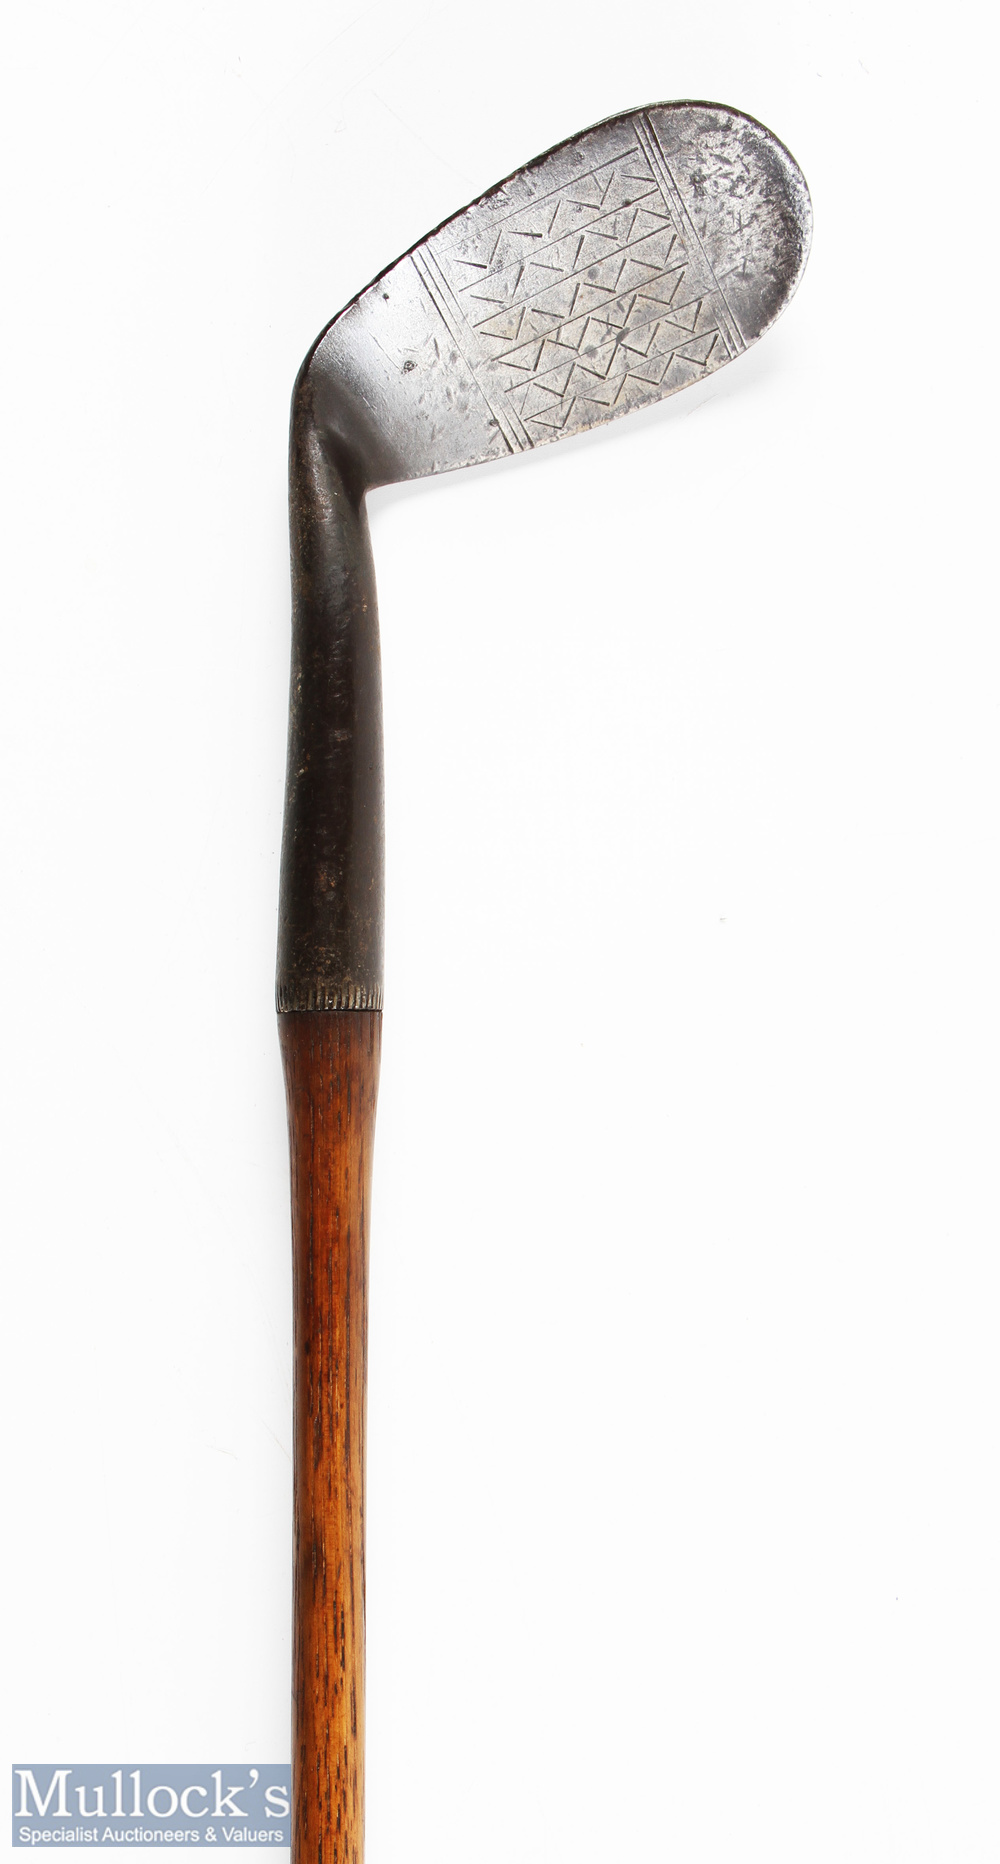 Bussey & Co London mashie niblick showing the maker's arrow cleek mark and unusual face markings, - Image 2 of 2